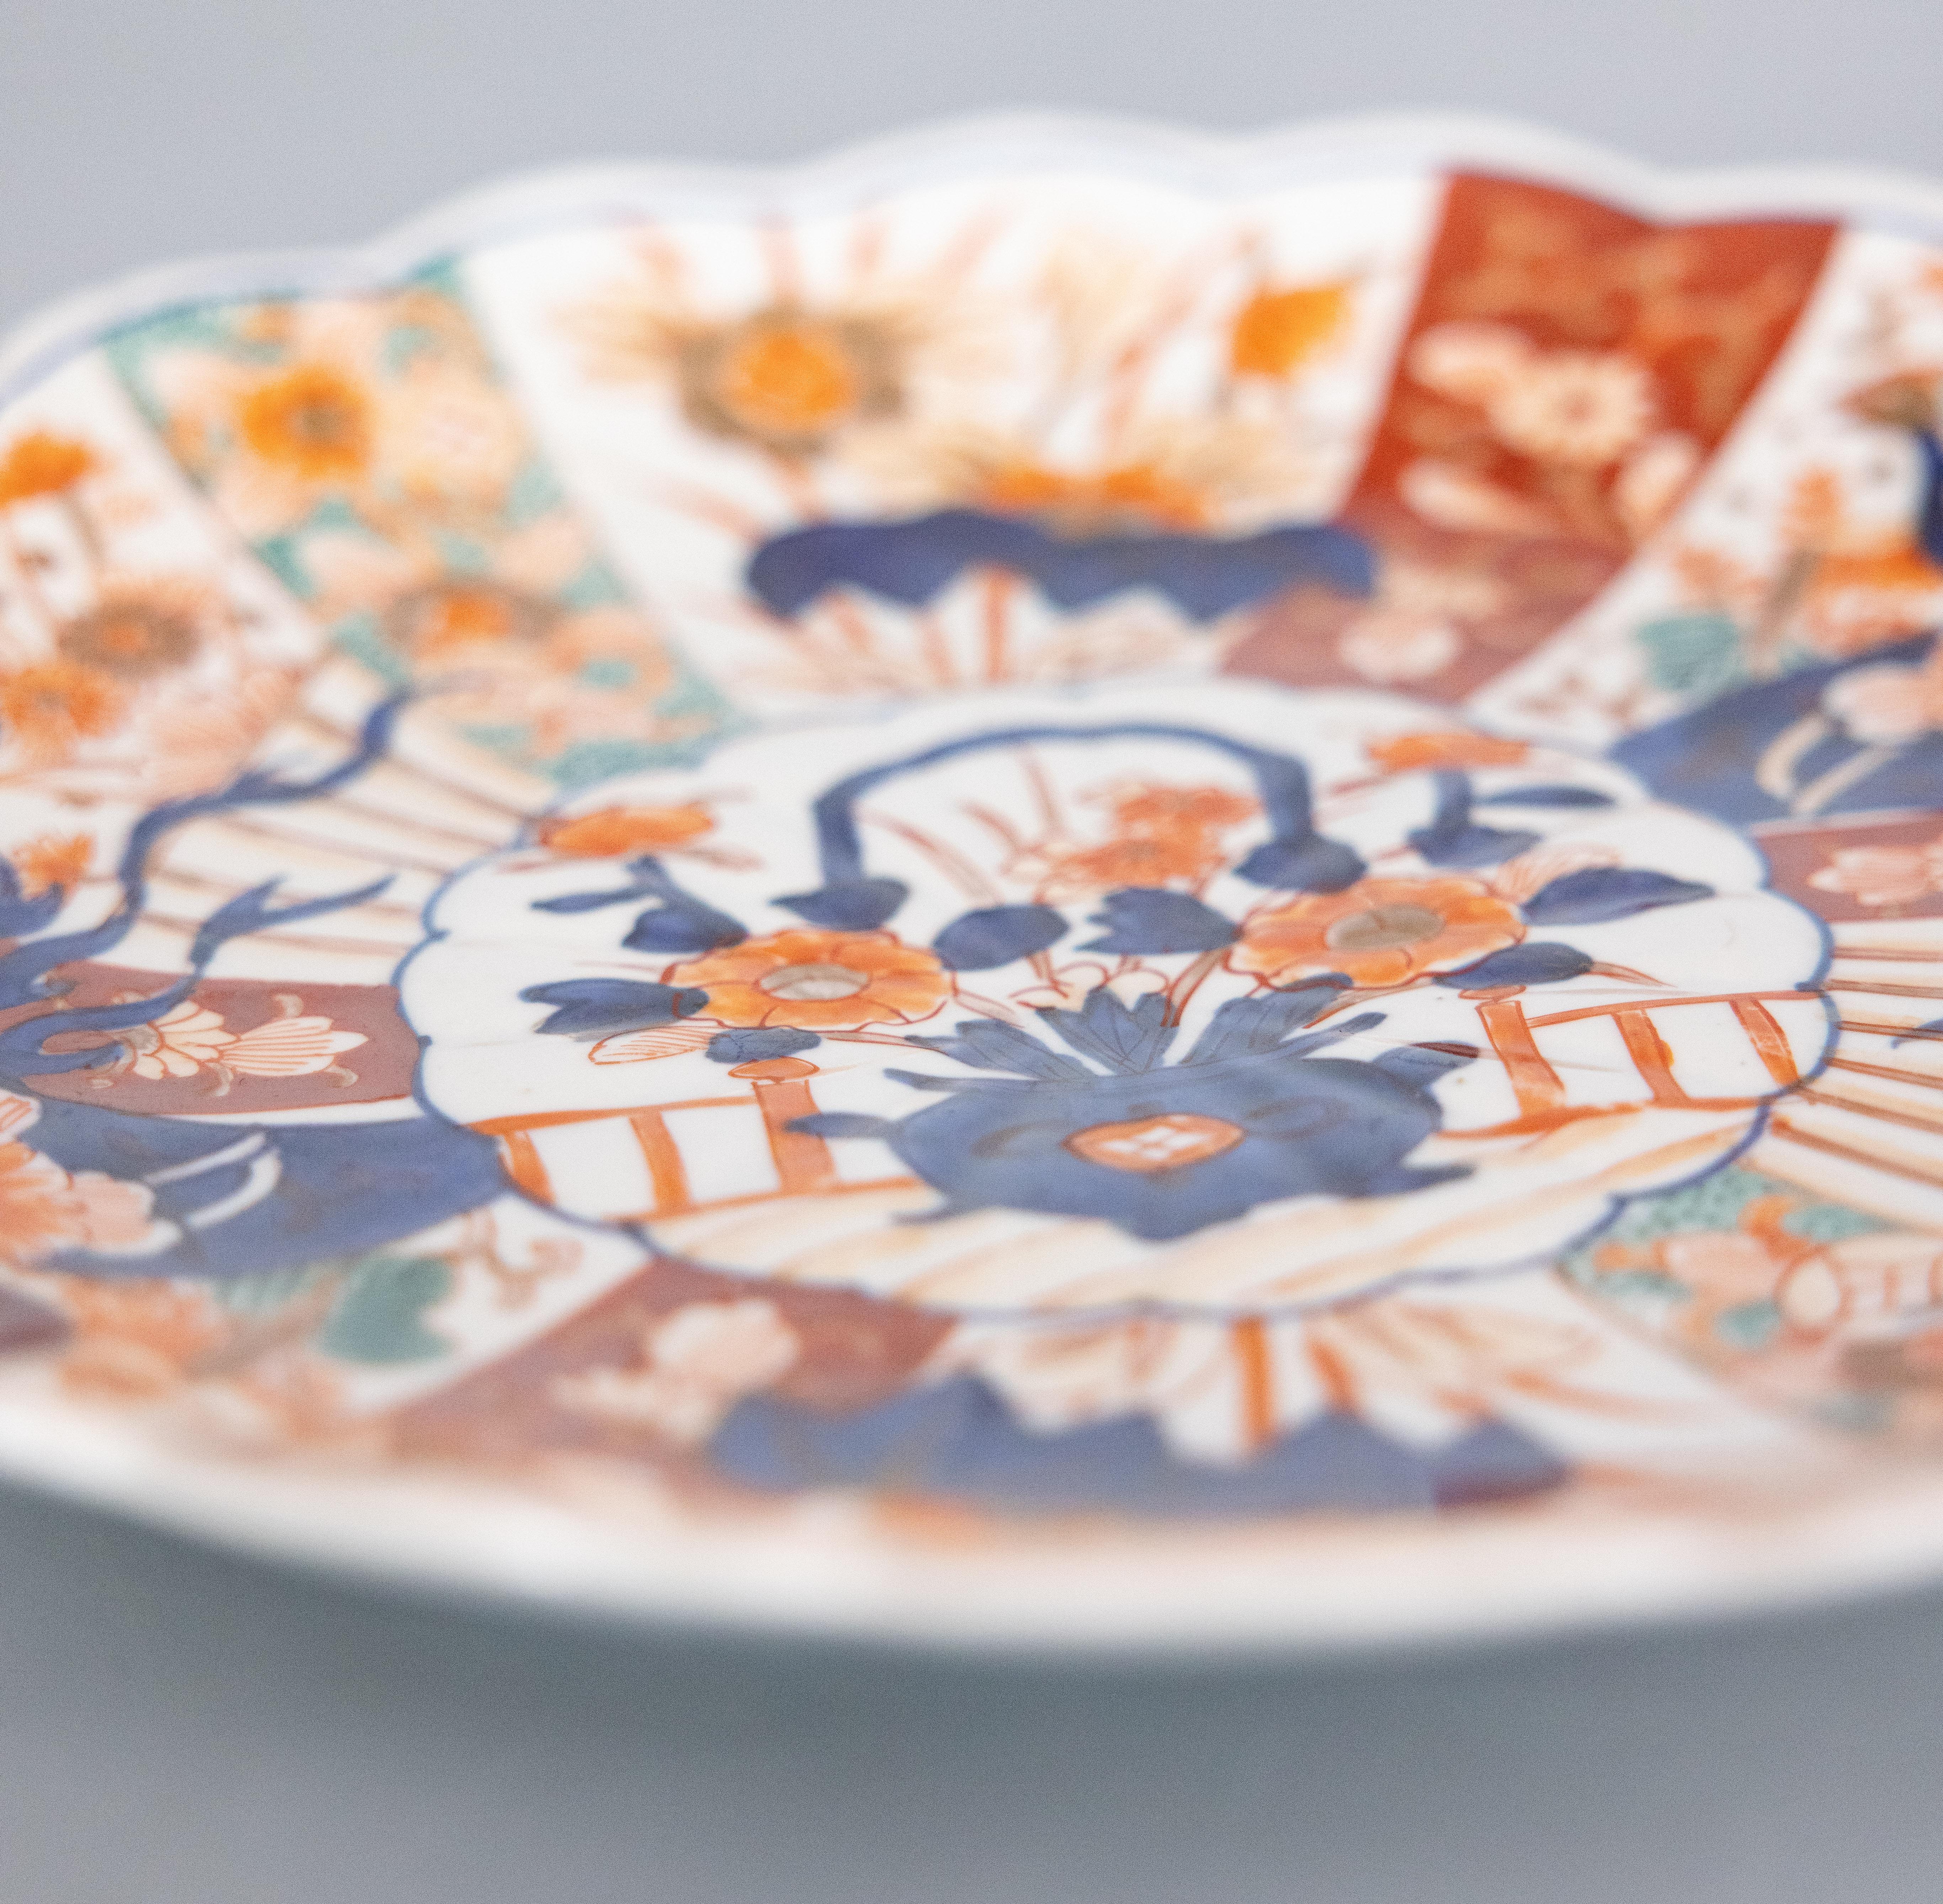 19th Century Japanese Meiji Period Imari Scalloped Charger Plate In Good Condition For Sale In Pearland, TX